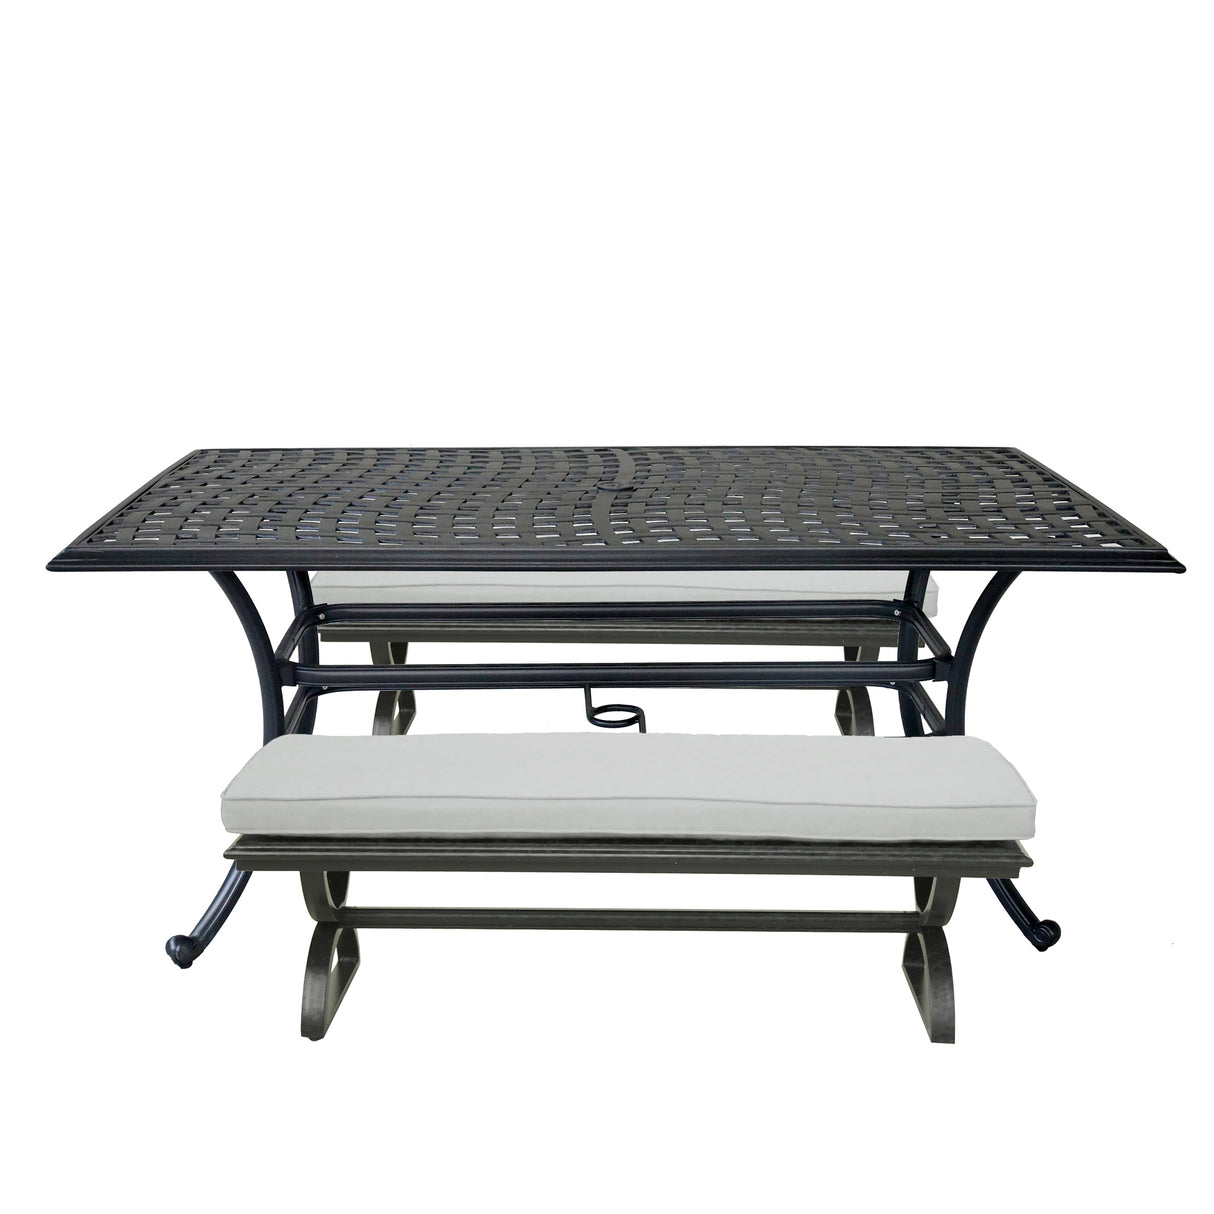 3 Piece Patio Aluminum Dining Set, Rectangle Table with 2 Cushioned Benches, Cast Silver